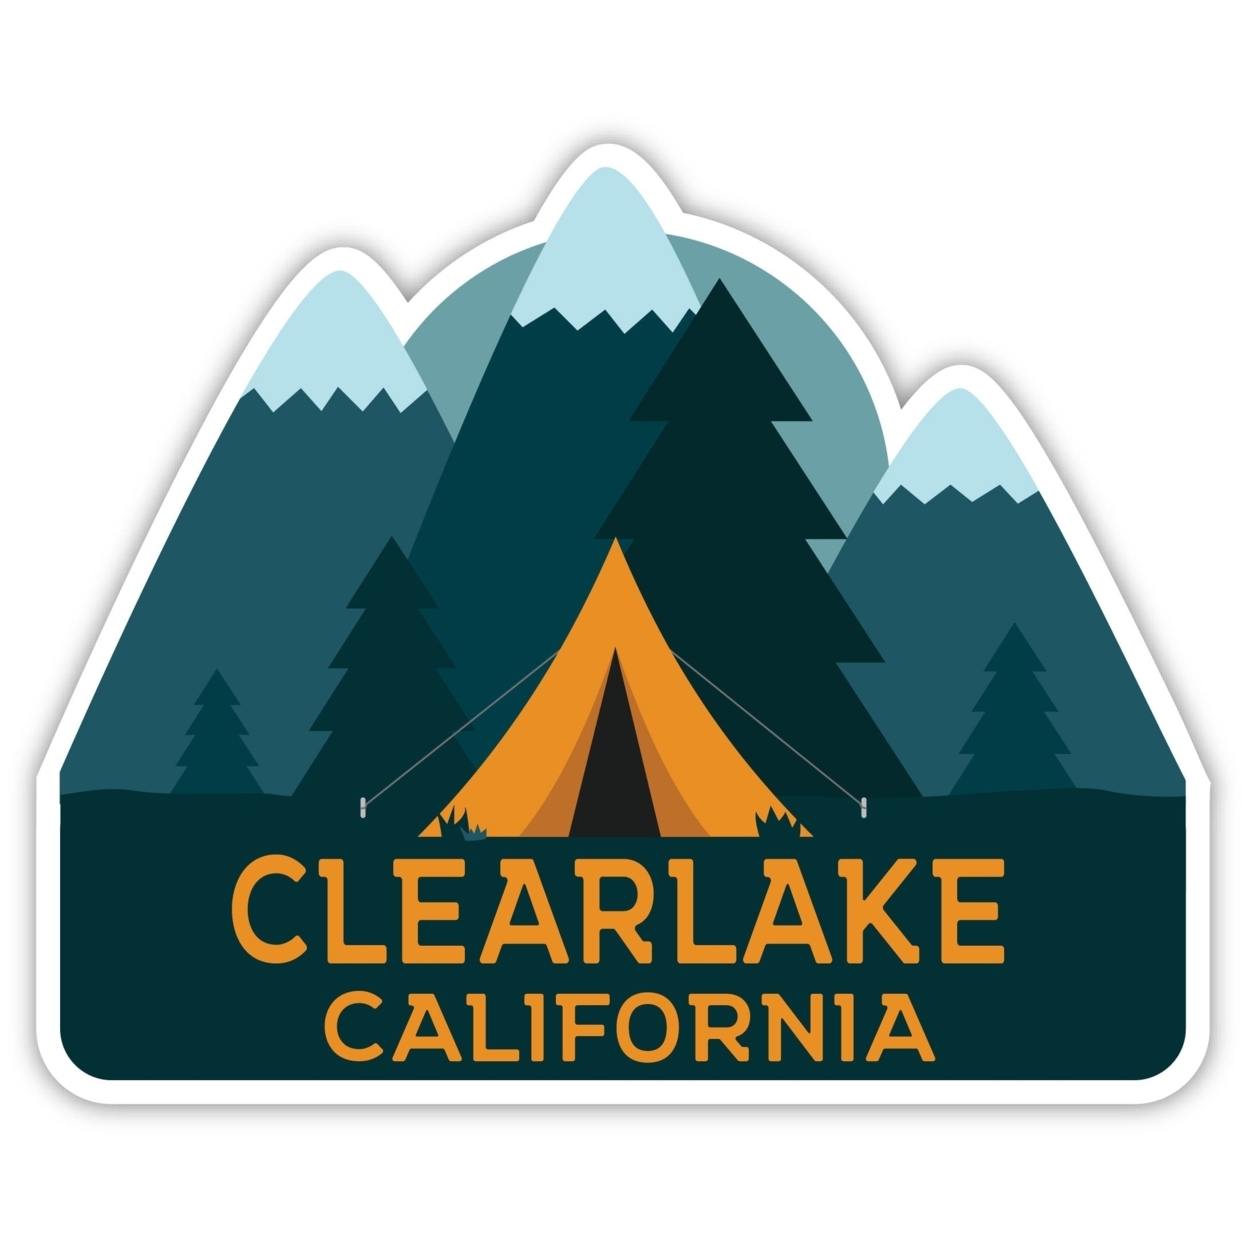 Clearlake California Souvenir Decorative Stickers (Choose Theme And Size) - 4-Pack, 8-Inch, Bear